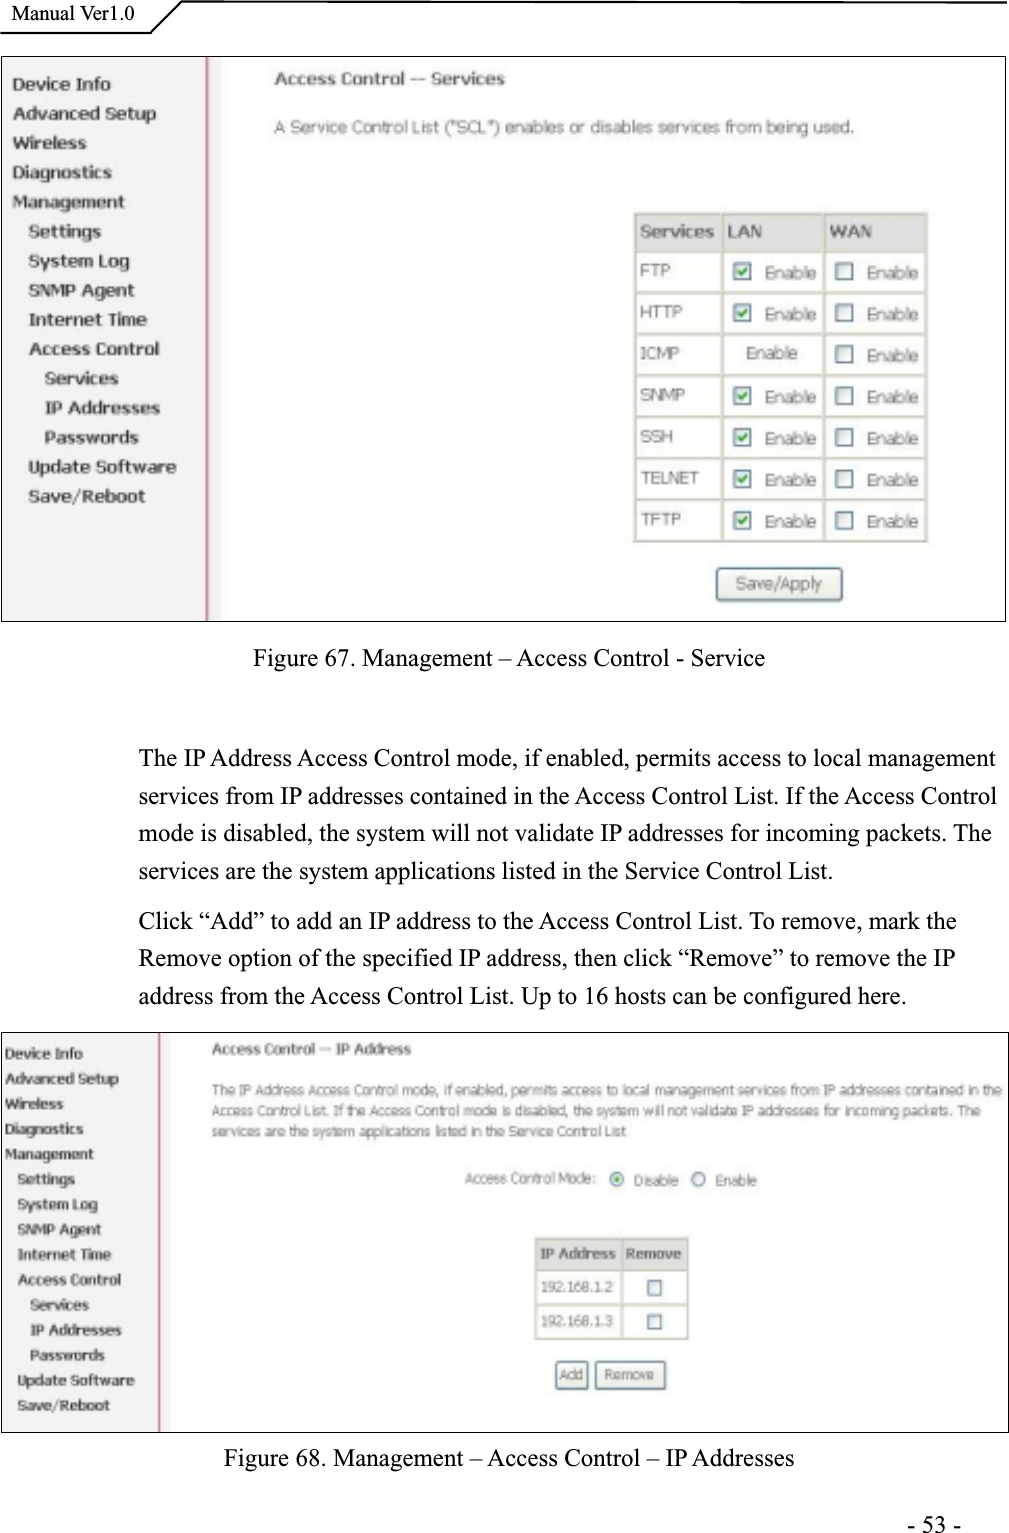  Manual Ver1.0Figure 67. Management – Access Control - ServiceThe IP Address Access Control mode, if enabled, permits access to local managementservices from IP addresses contained in the Access Control List. If the Access Control mode is disabled, the system will not validate IP addresses for incoming packets. Theservices are the system applications listed in the Service Control List. Click “Add” to add an IP address to the Access Control List. To remove, mark the Remove option of the specified IP address, then click “Remove” to remove the IPaddress from the Access Control List. Up to 16 hosts can be configured here. Figure 68. Management – Access Control – IP Addresses                                                                     -53-